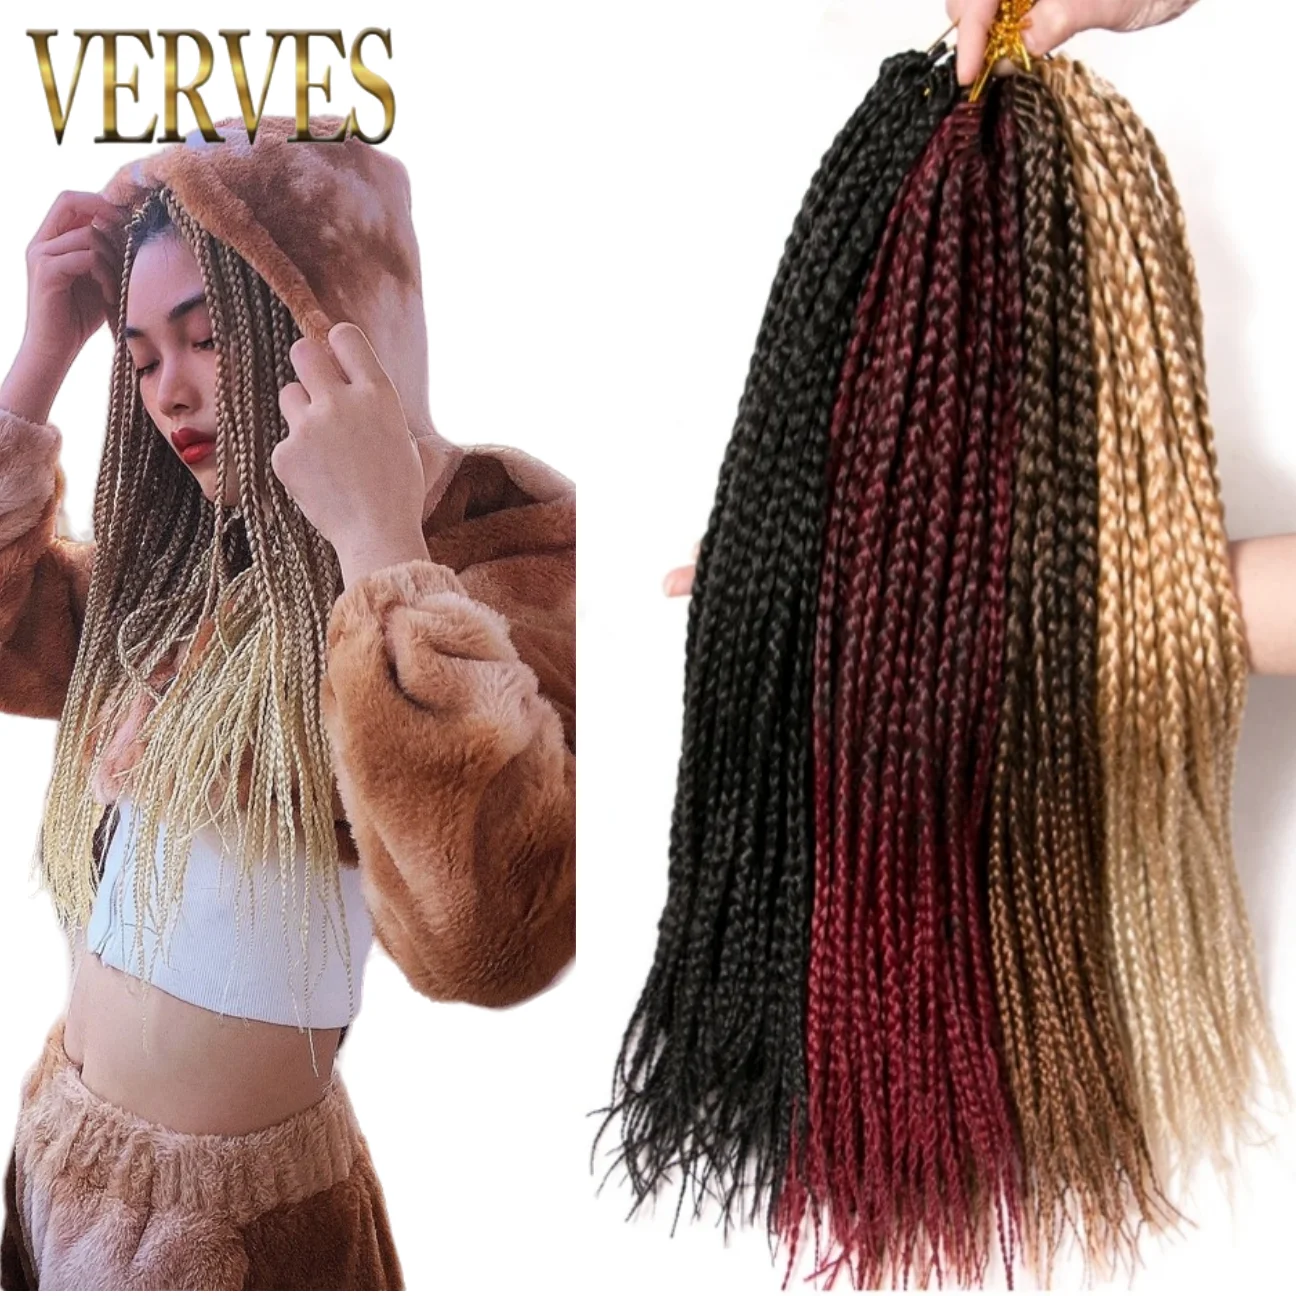 

VERVES Box Braids Synthetic 18 inch 5Pcs/Lot Ombre Crochet Braided Boxing Hair Extensions Faux Braiding Asian Women Brown Black